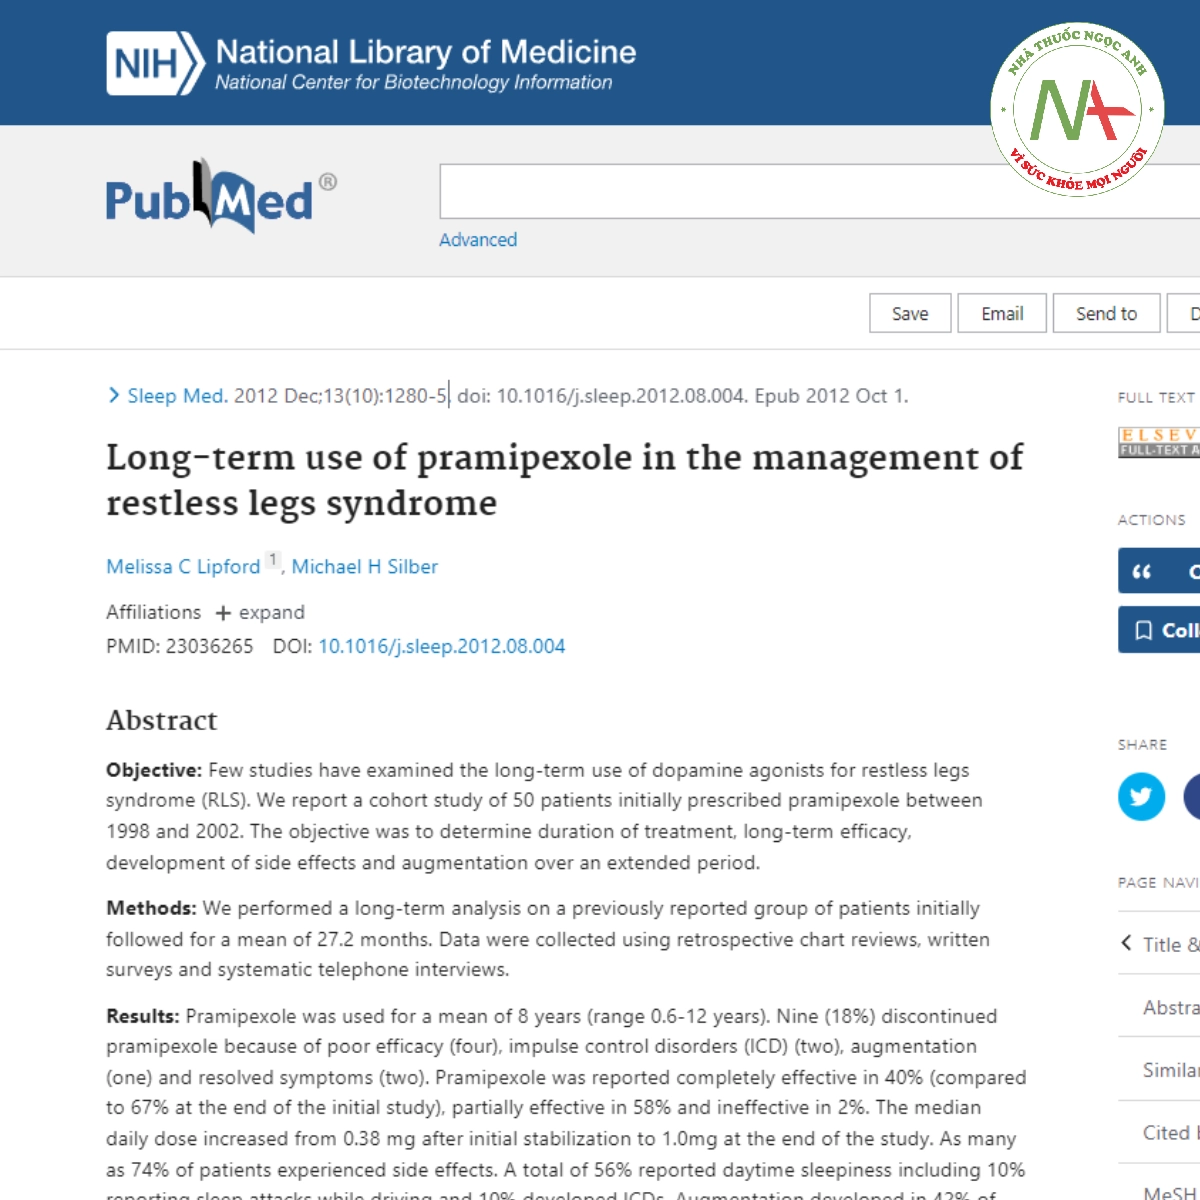 Long-term use of pramipexole in the management of restless legs syndrome